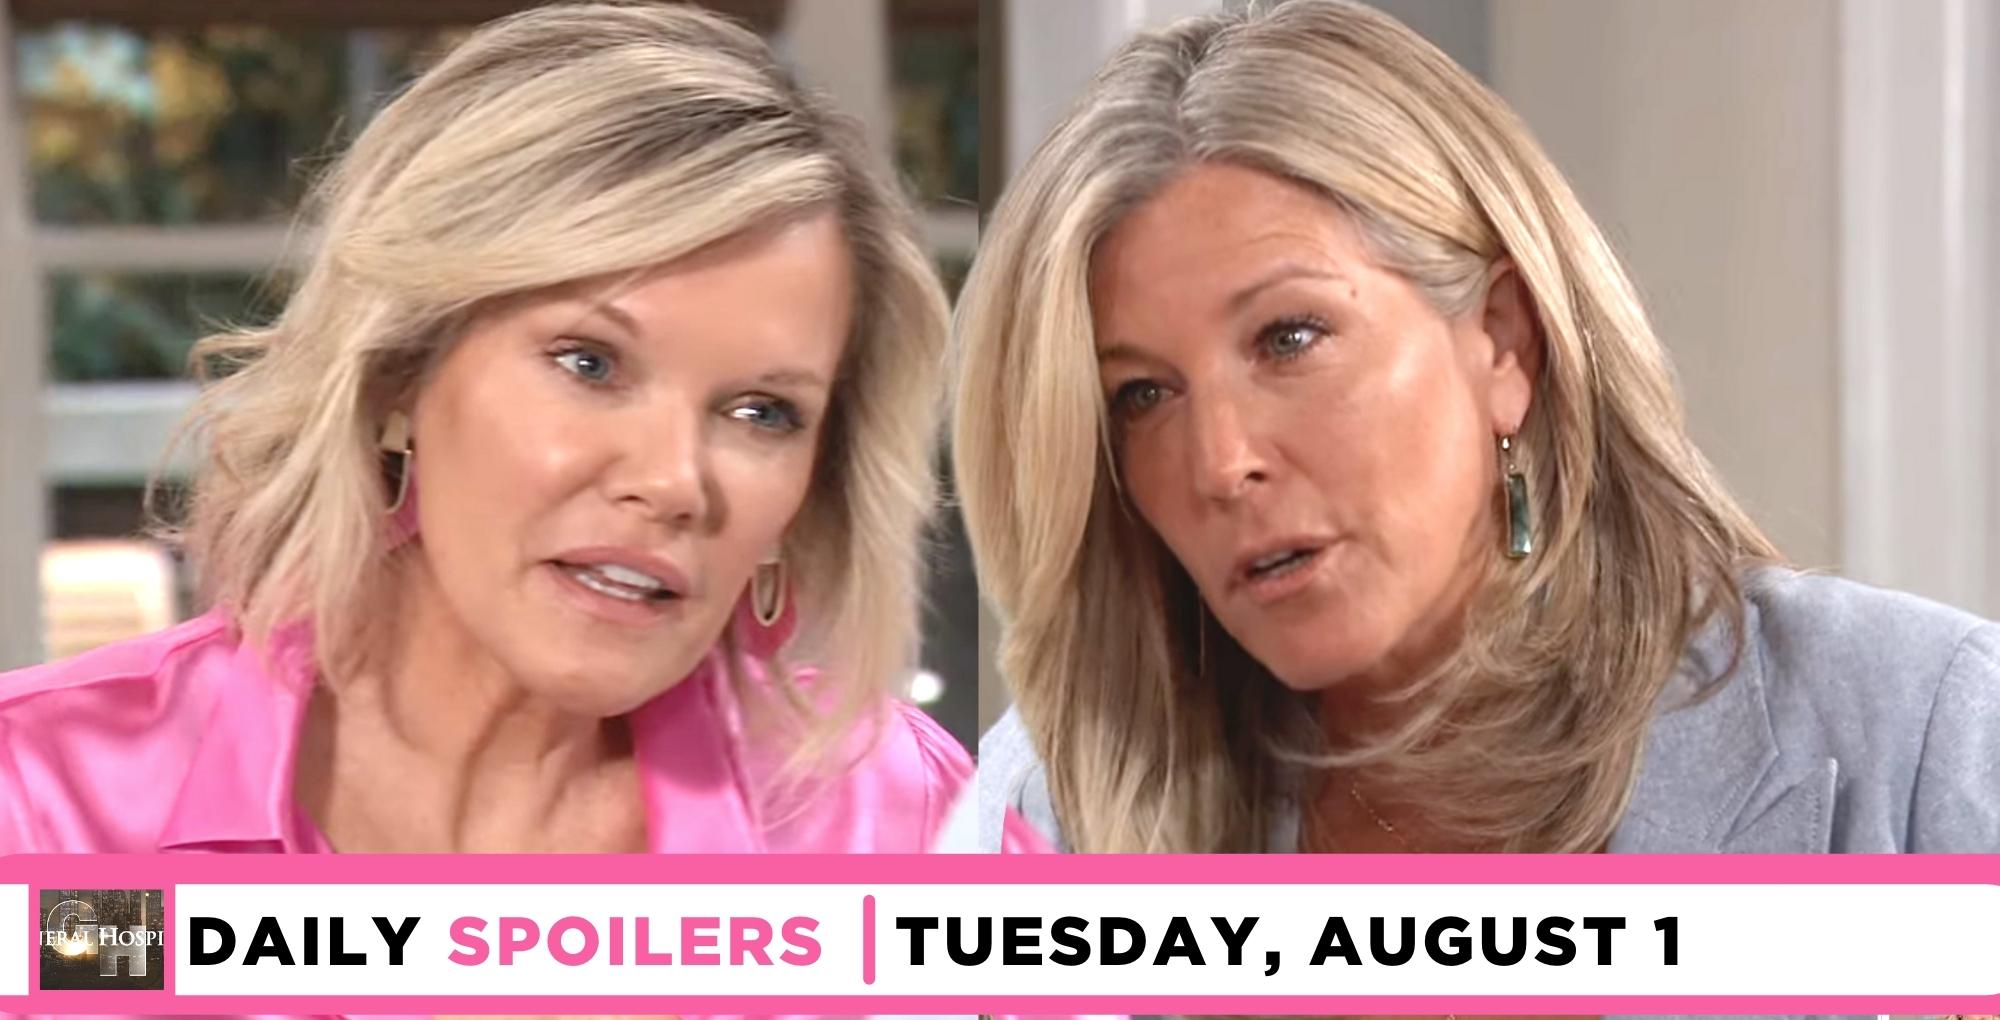 general hospital spoilers for august 1, 2023, has ava being questioned by carly.